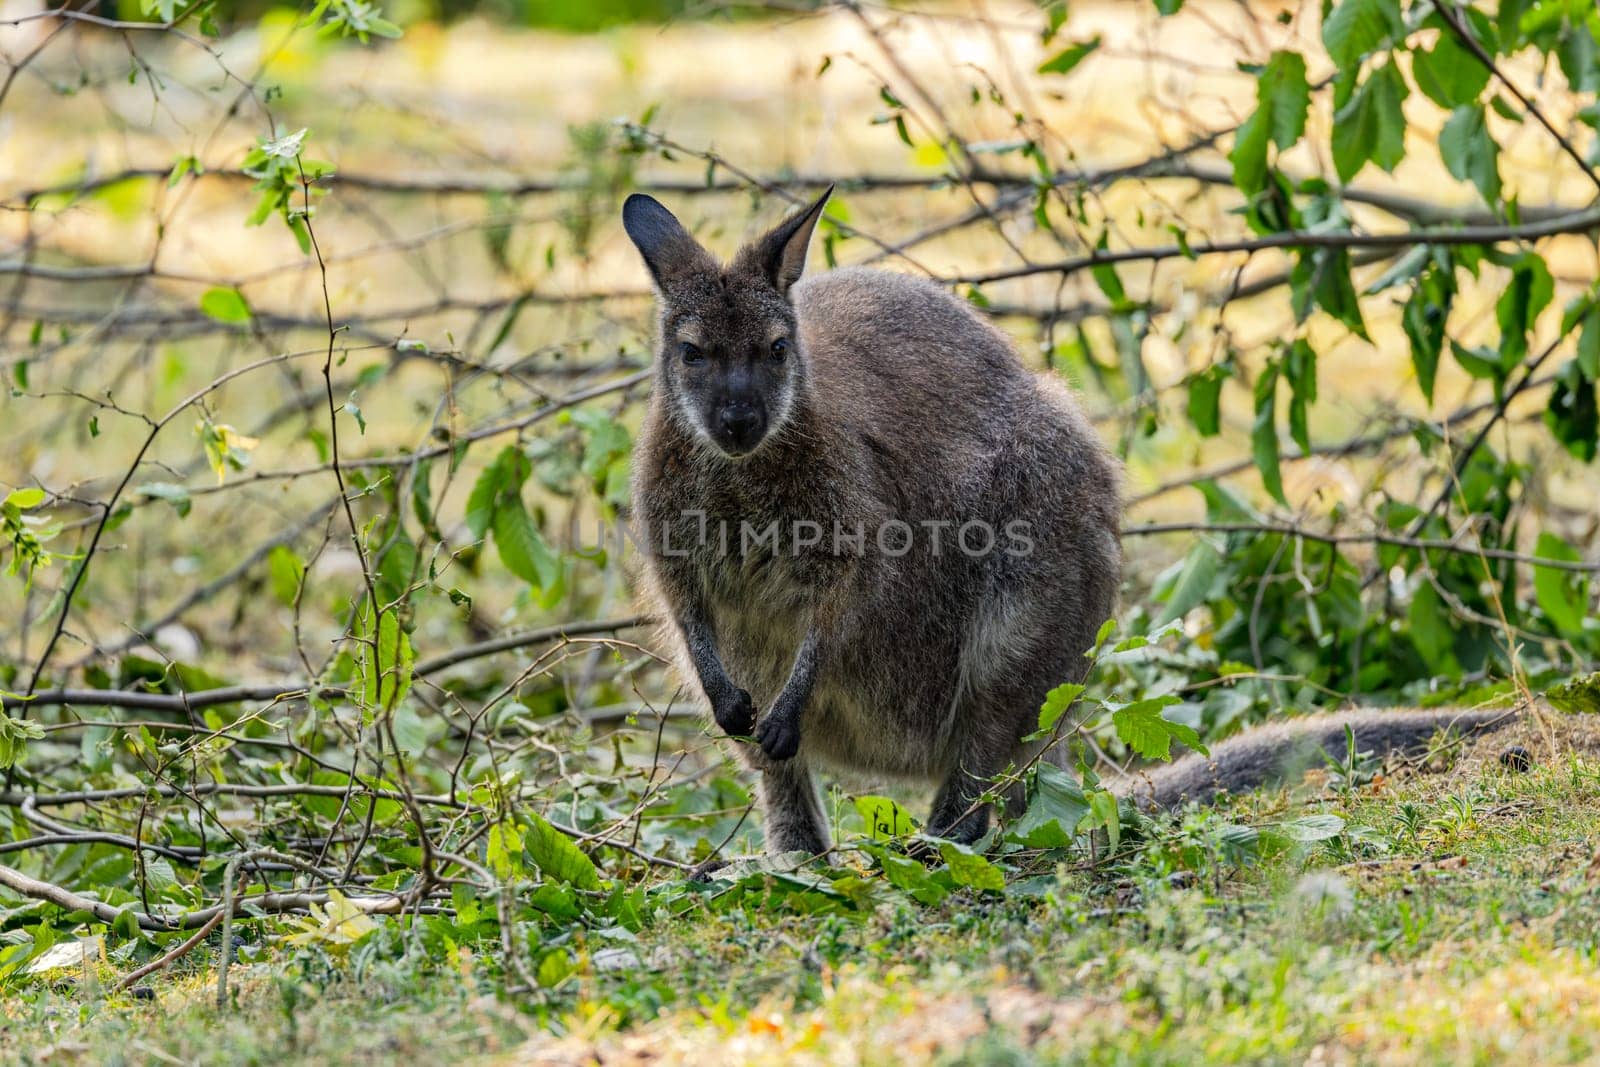 A Bennett's wallaby or Bennett's kangaroo Notamacropus rufogriseus searches for food between broken branches, zoo in Germany